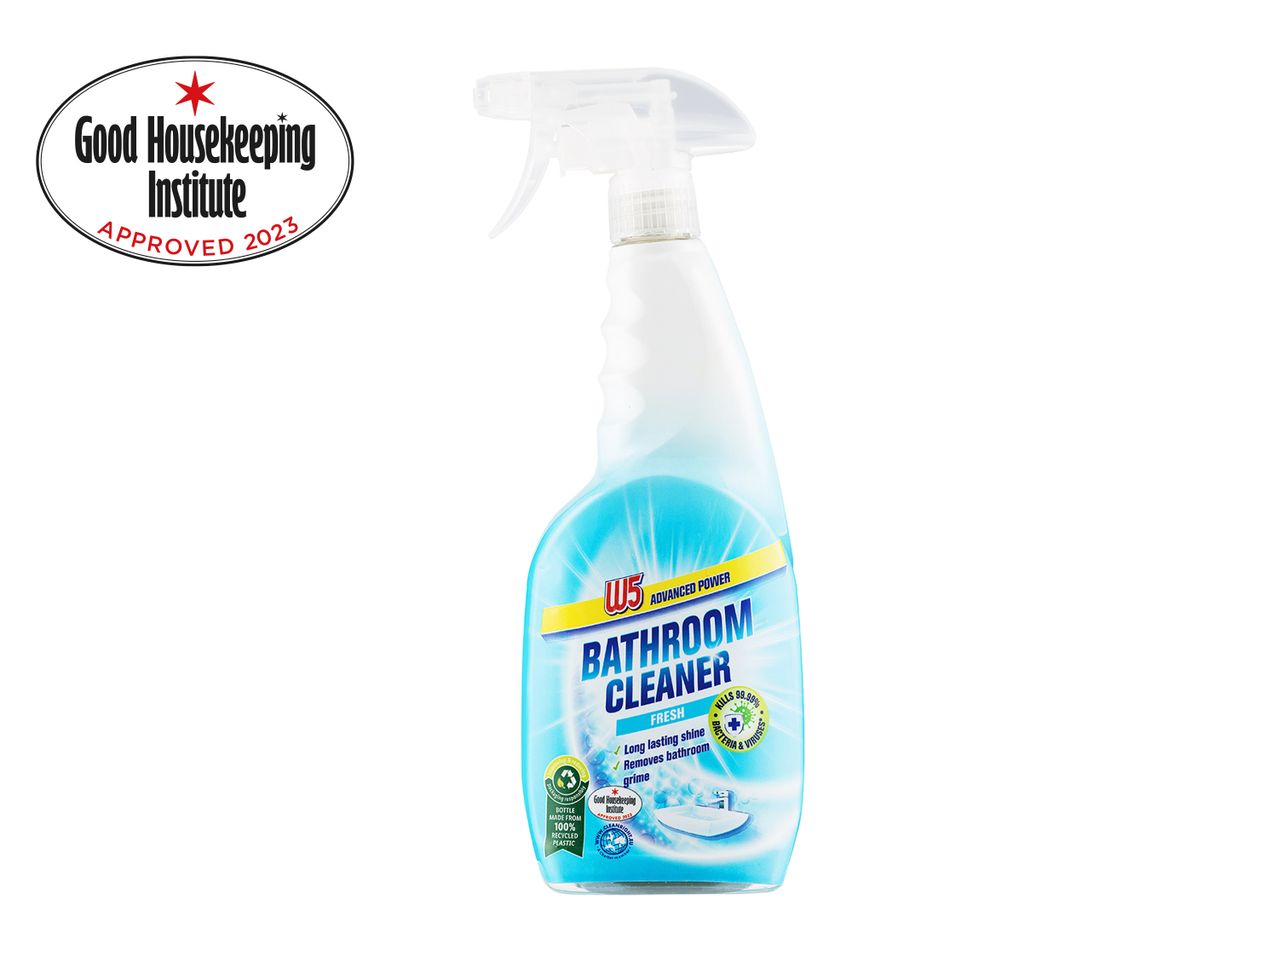 Go to full screen view: W5 Kitchen / Bathroom Cleaner - Image 1